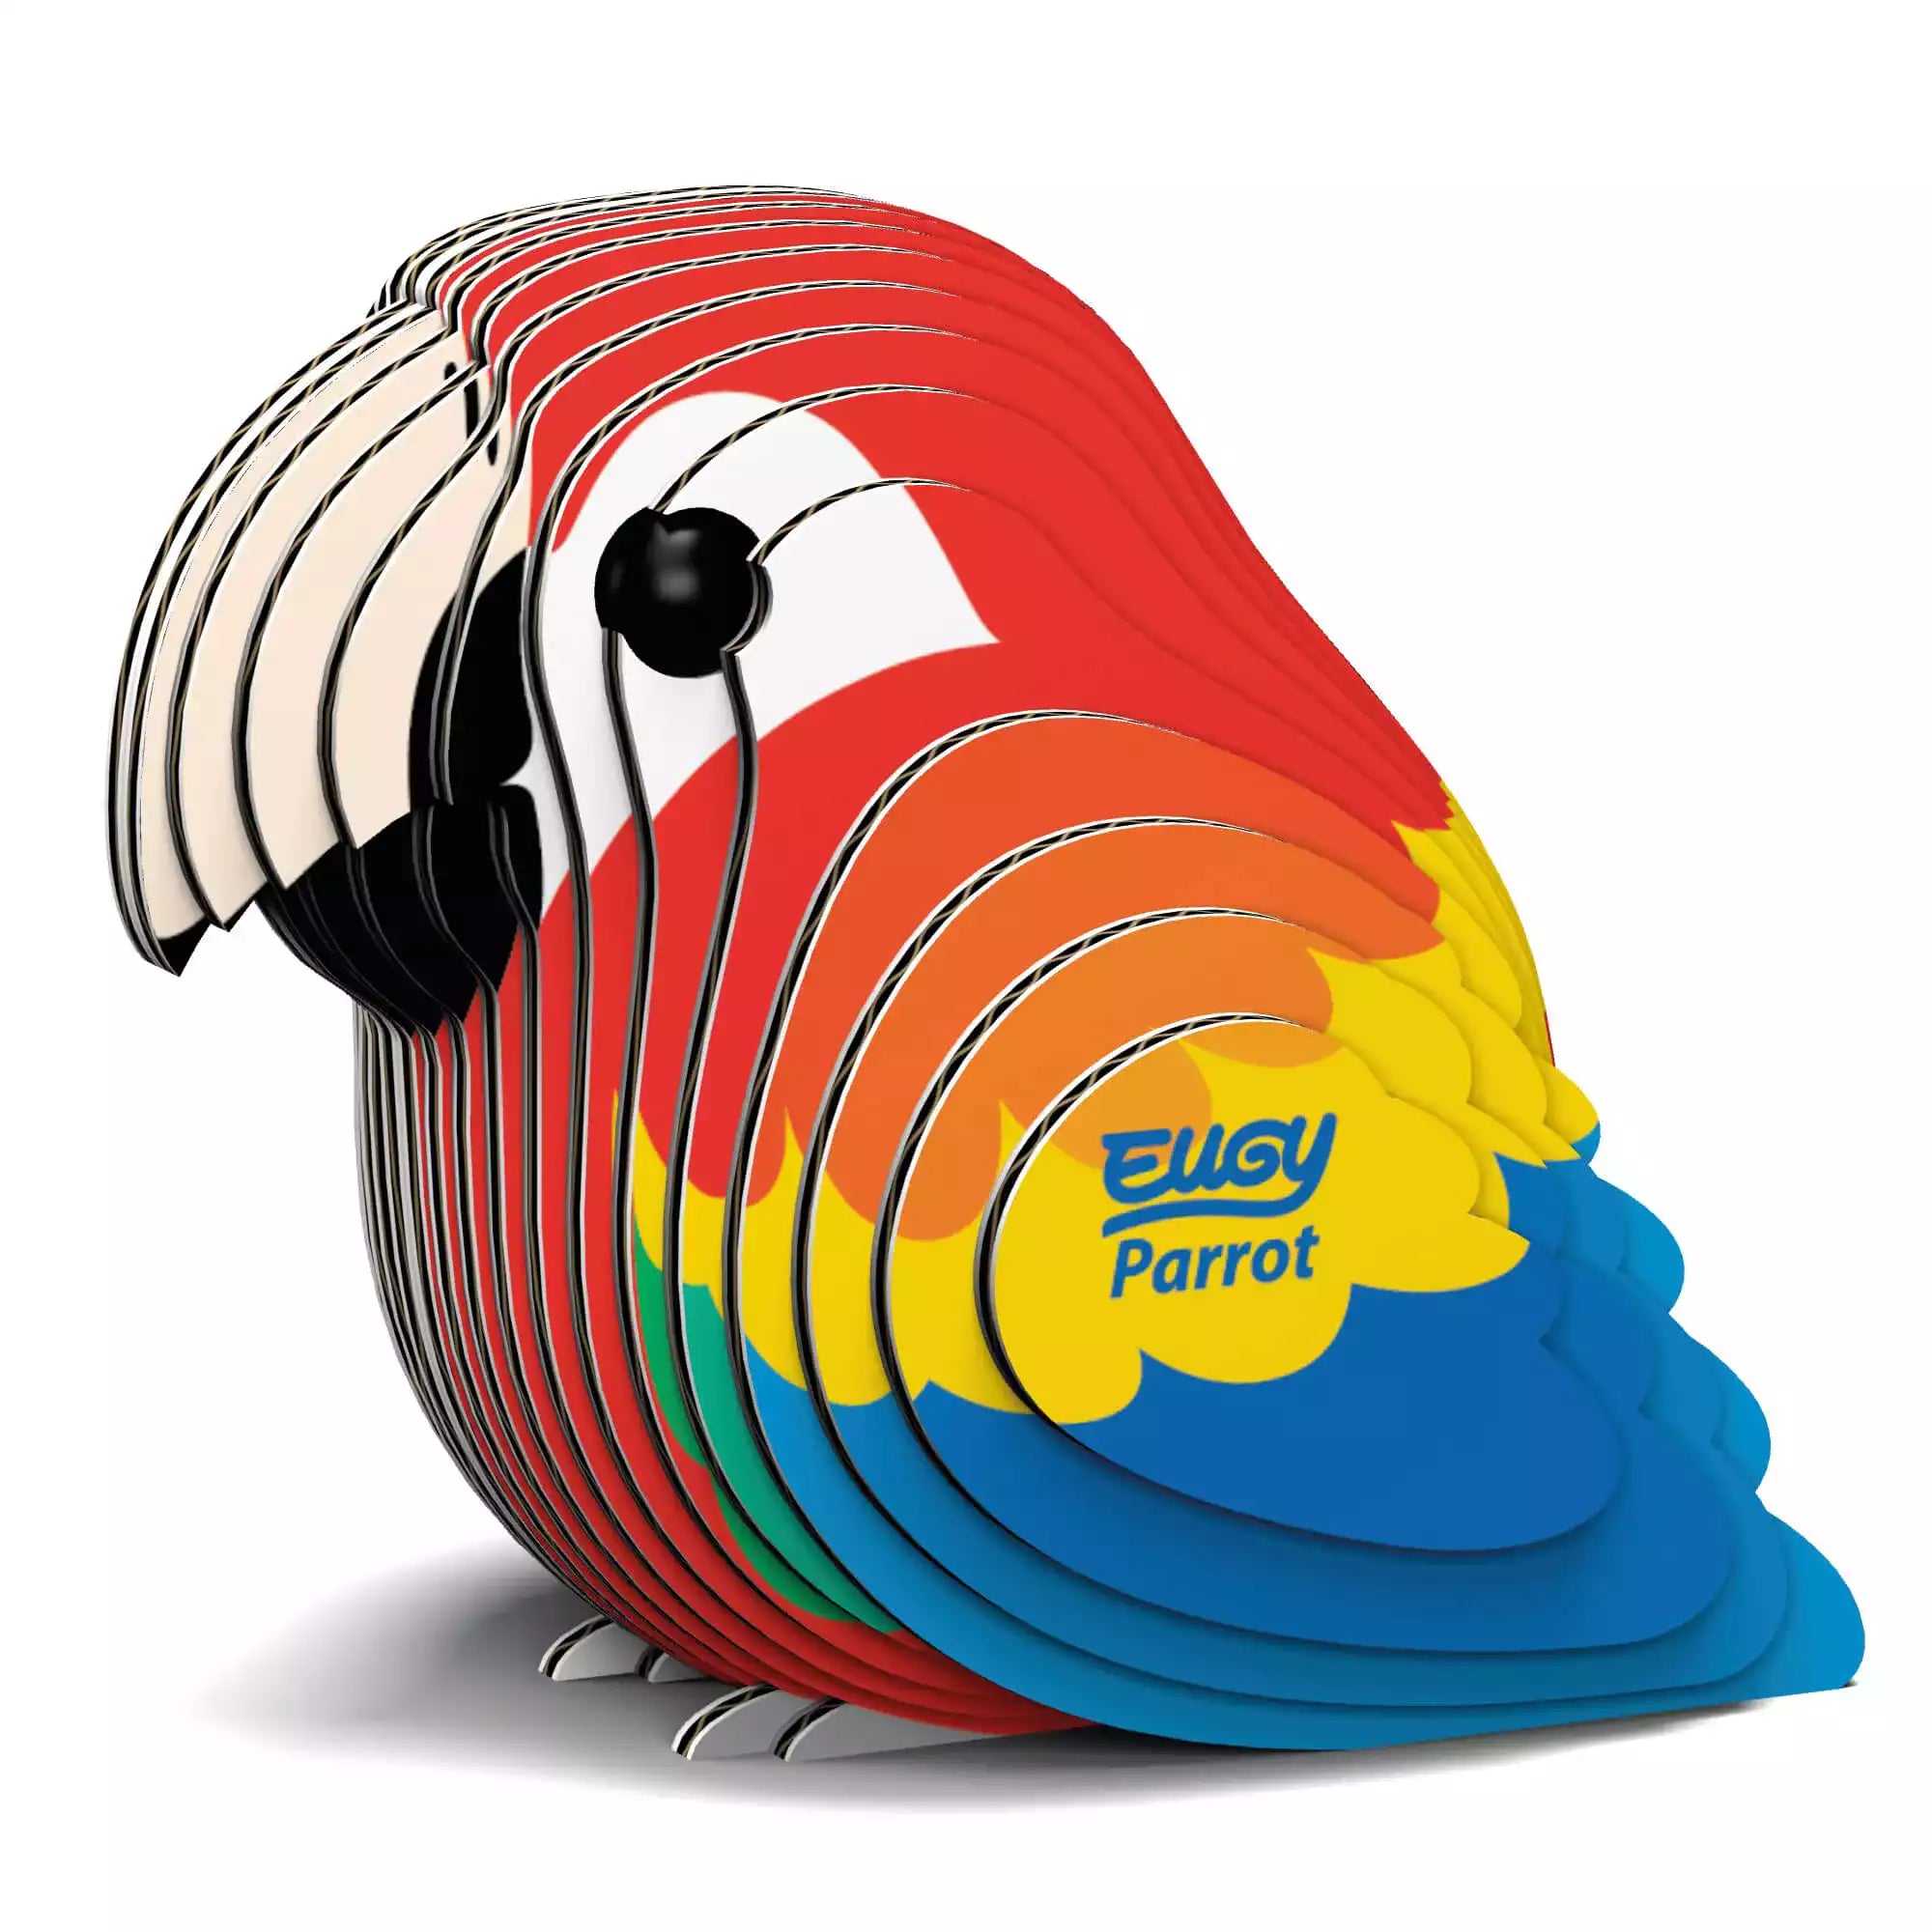 Eugy Parrot from brainstorm toys - eugy animals uk - shop brainstorm toys at The Toy Room